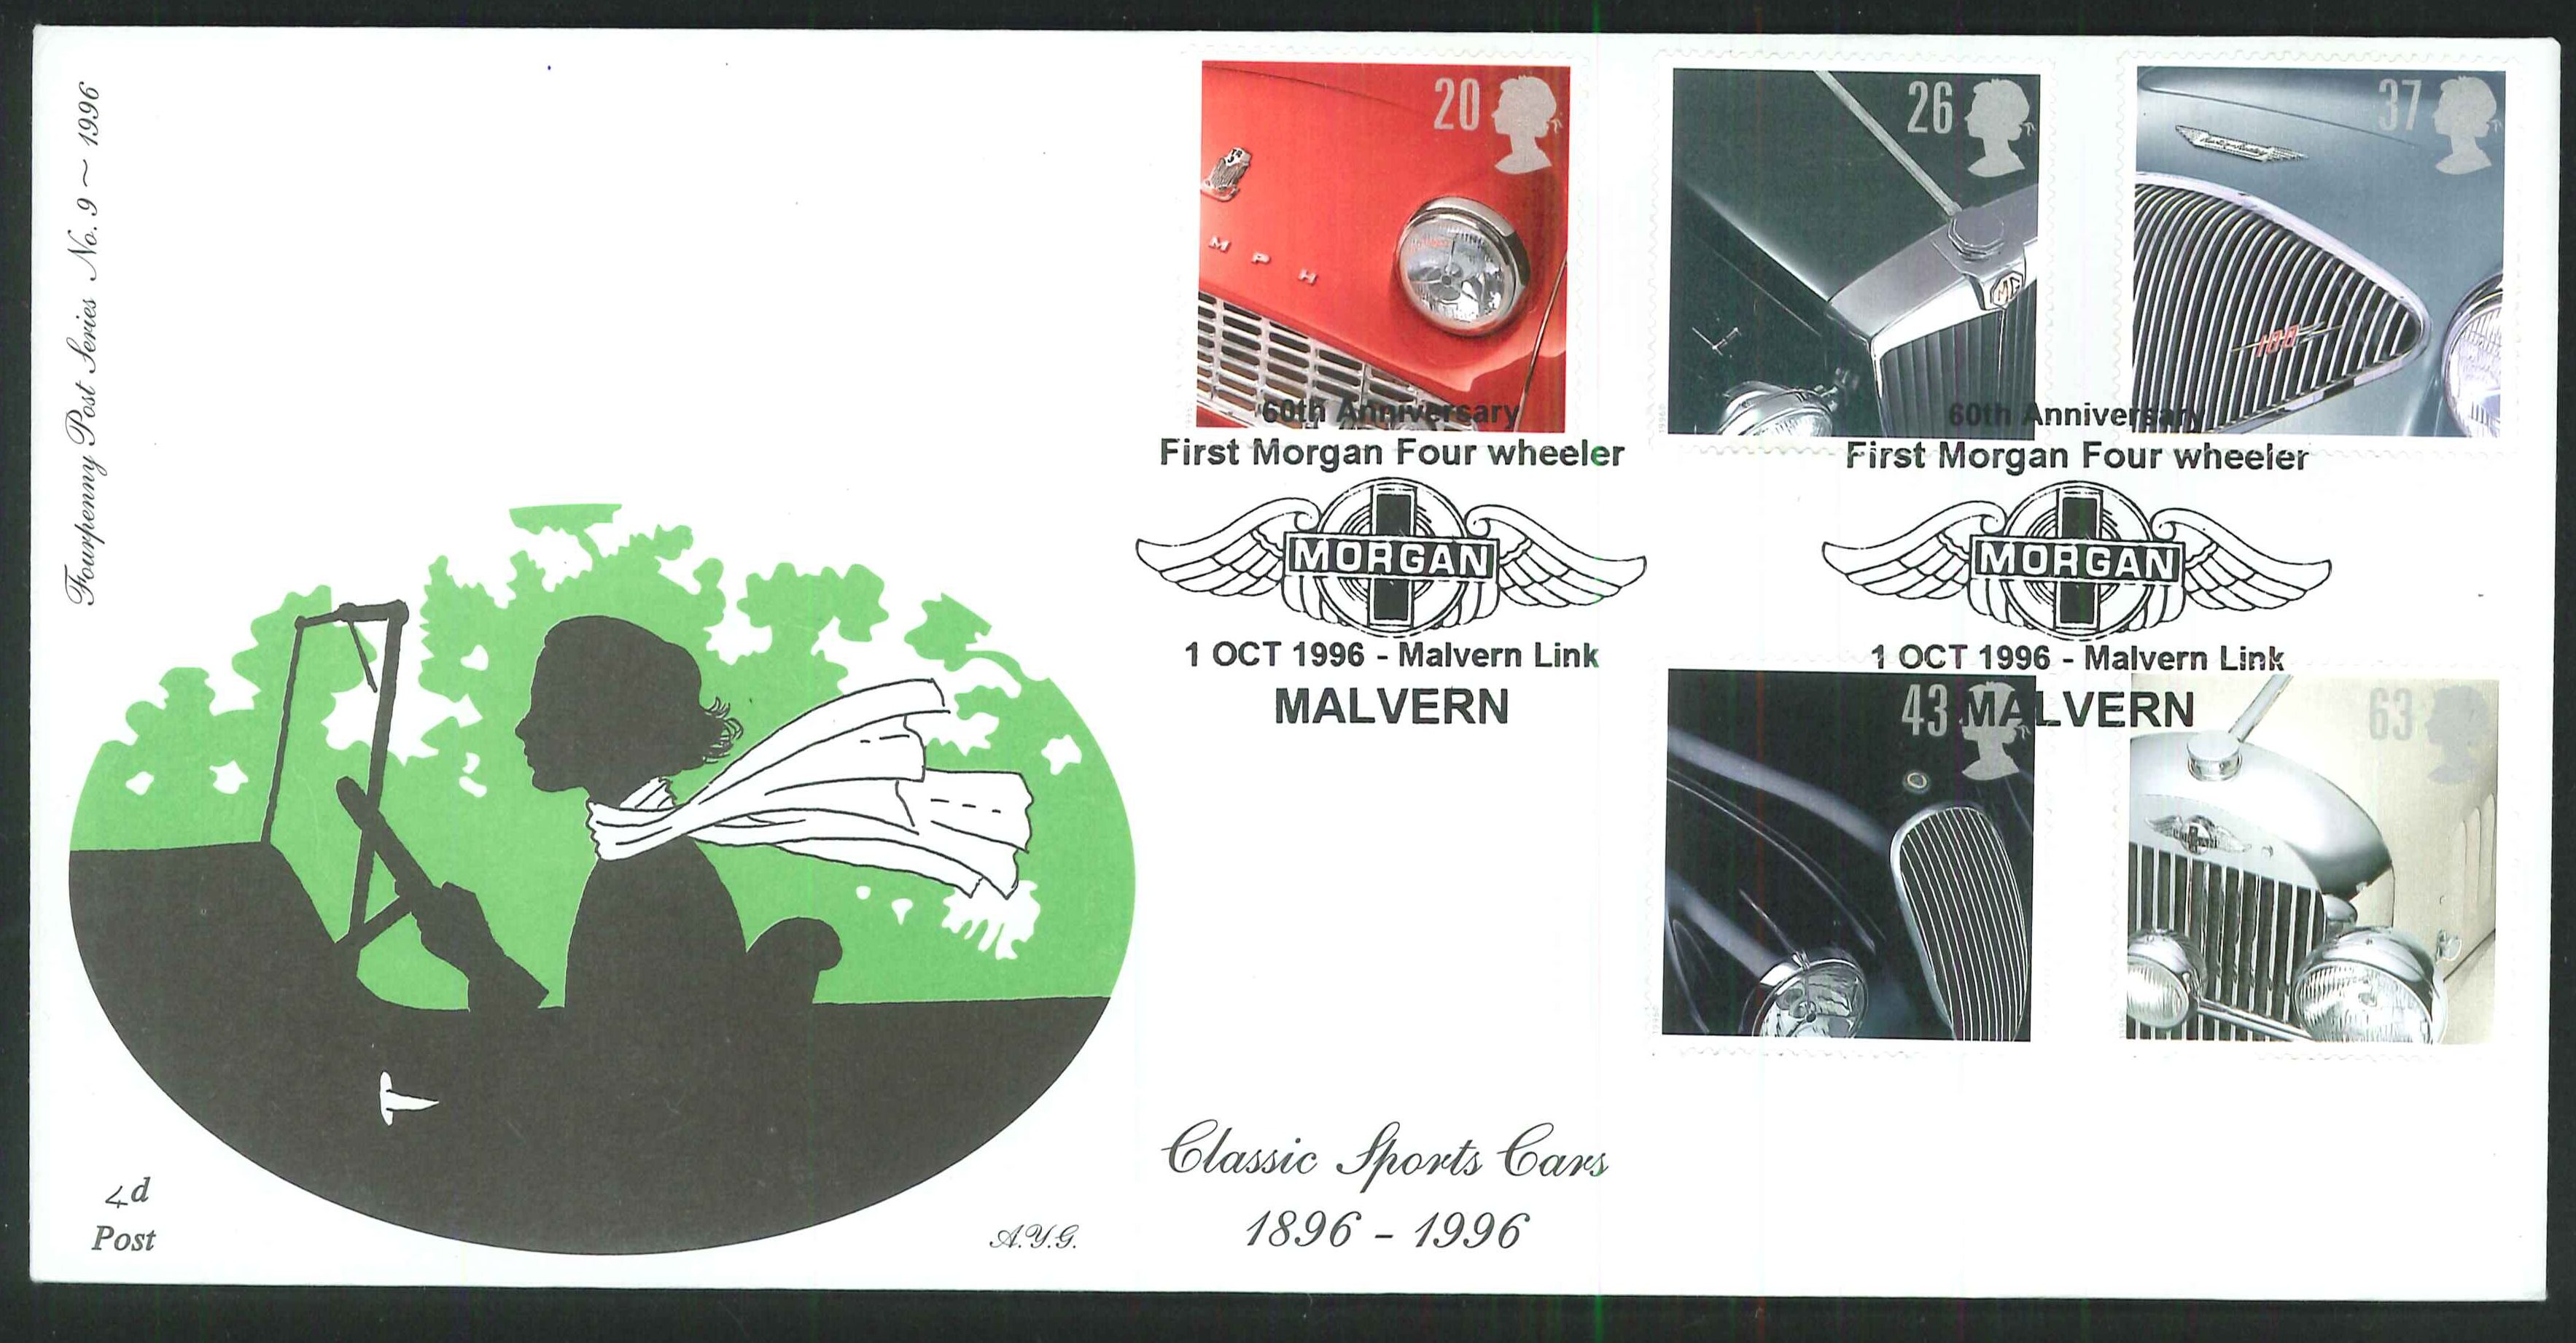 1996 - Classic Sports Cars 1896 - 1996, First Day Cover - Malvern Postmark - Click Image to Close